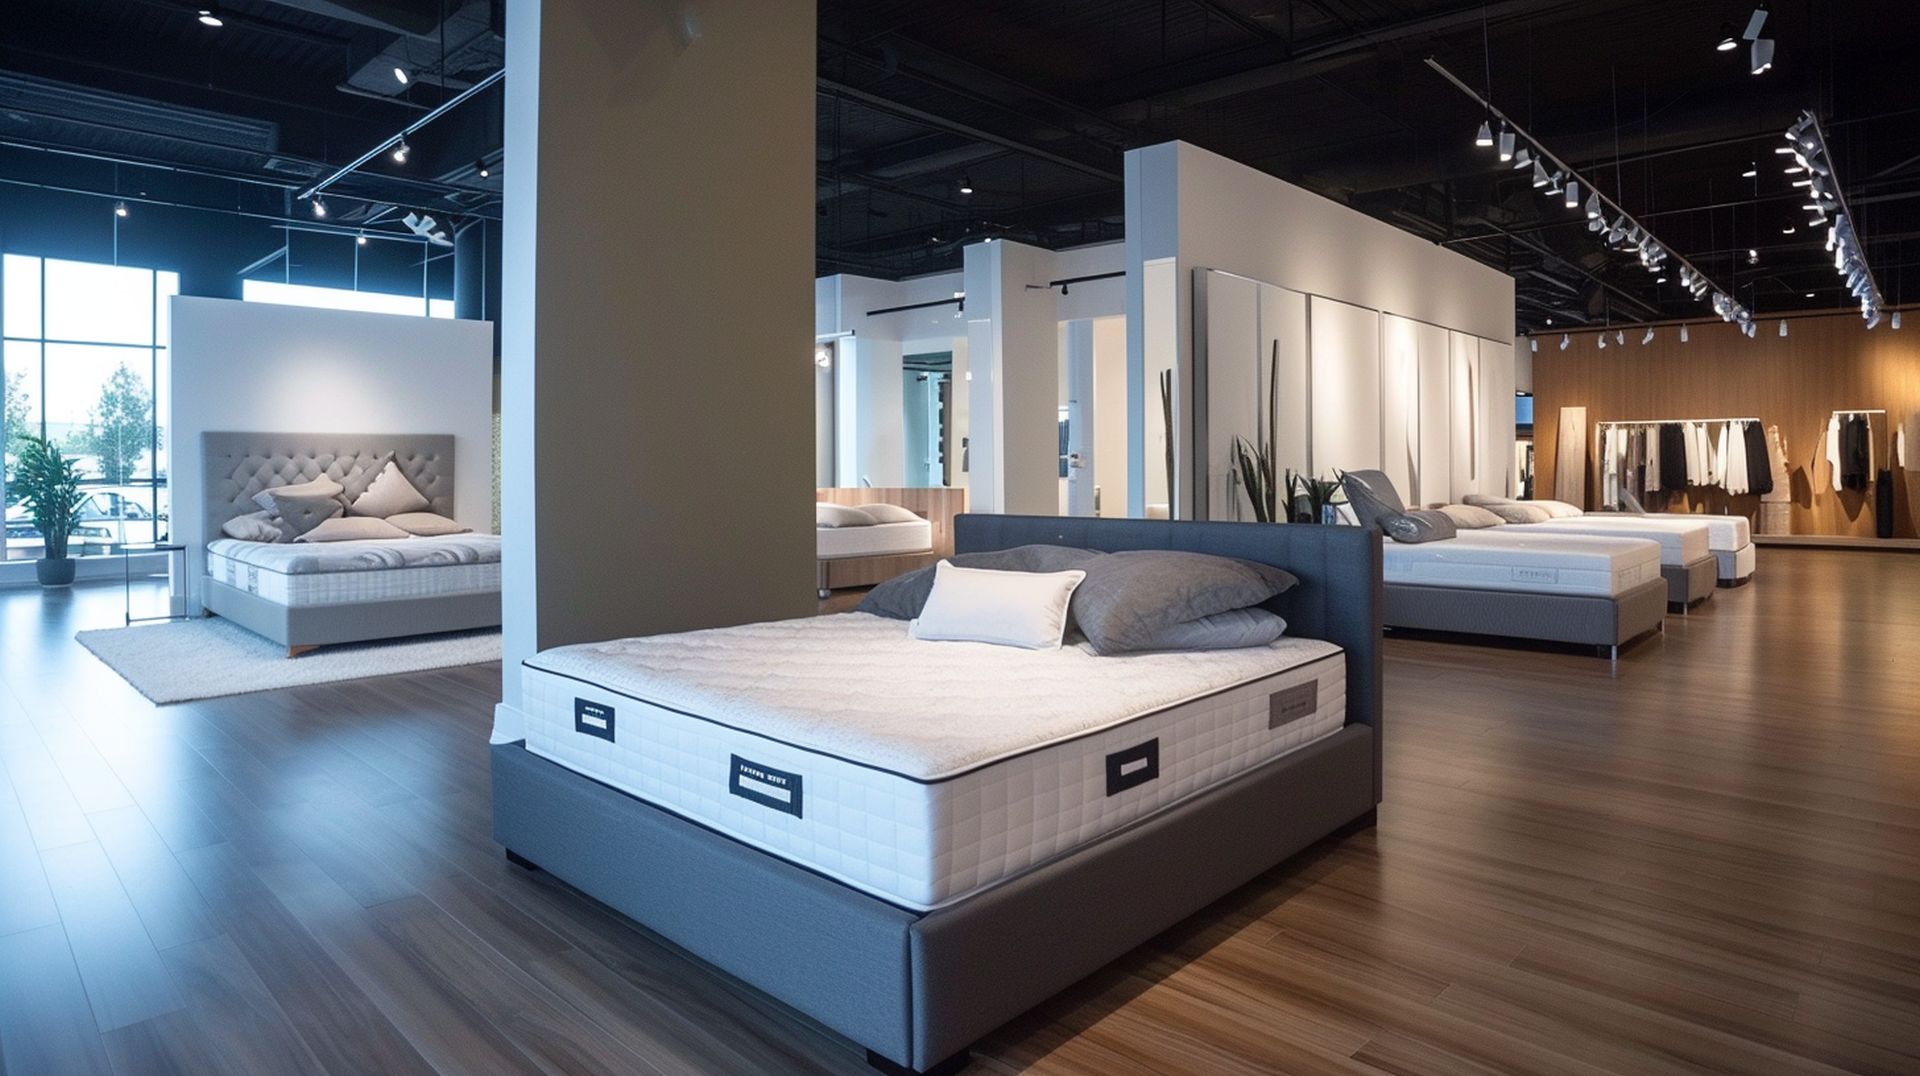 If you're looking for a new bed, mattress stores in Poway offer the best customer and delivery service, financing, and warranties in California